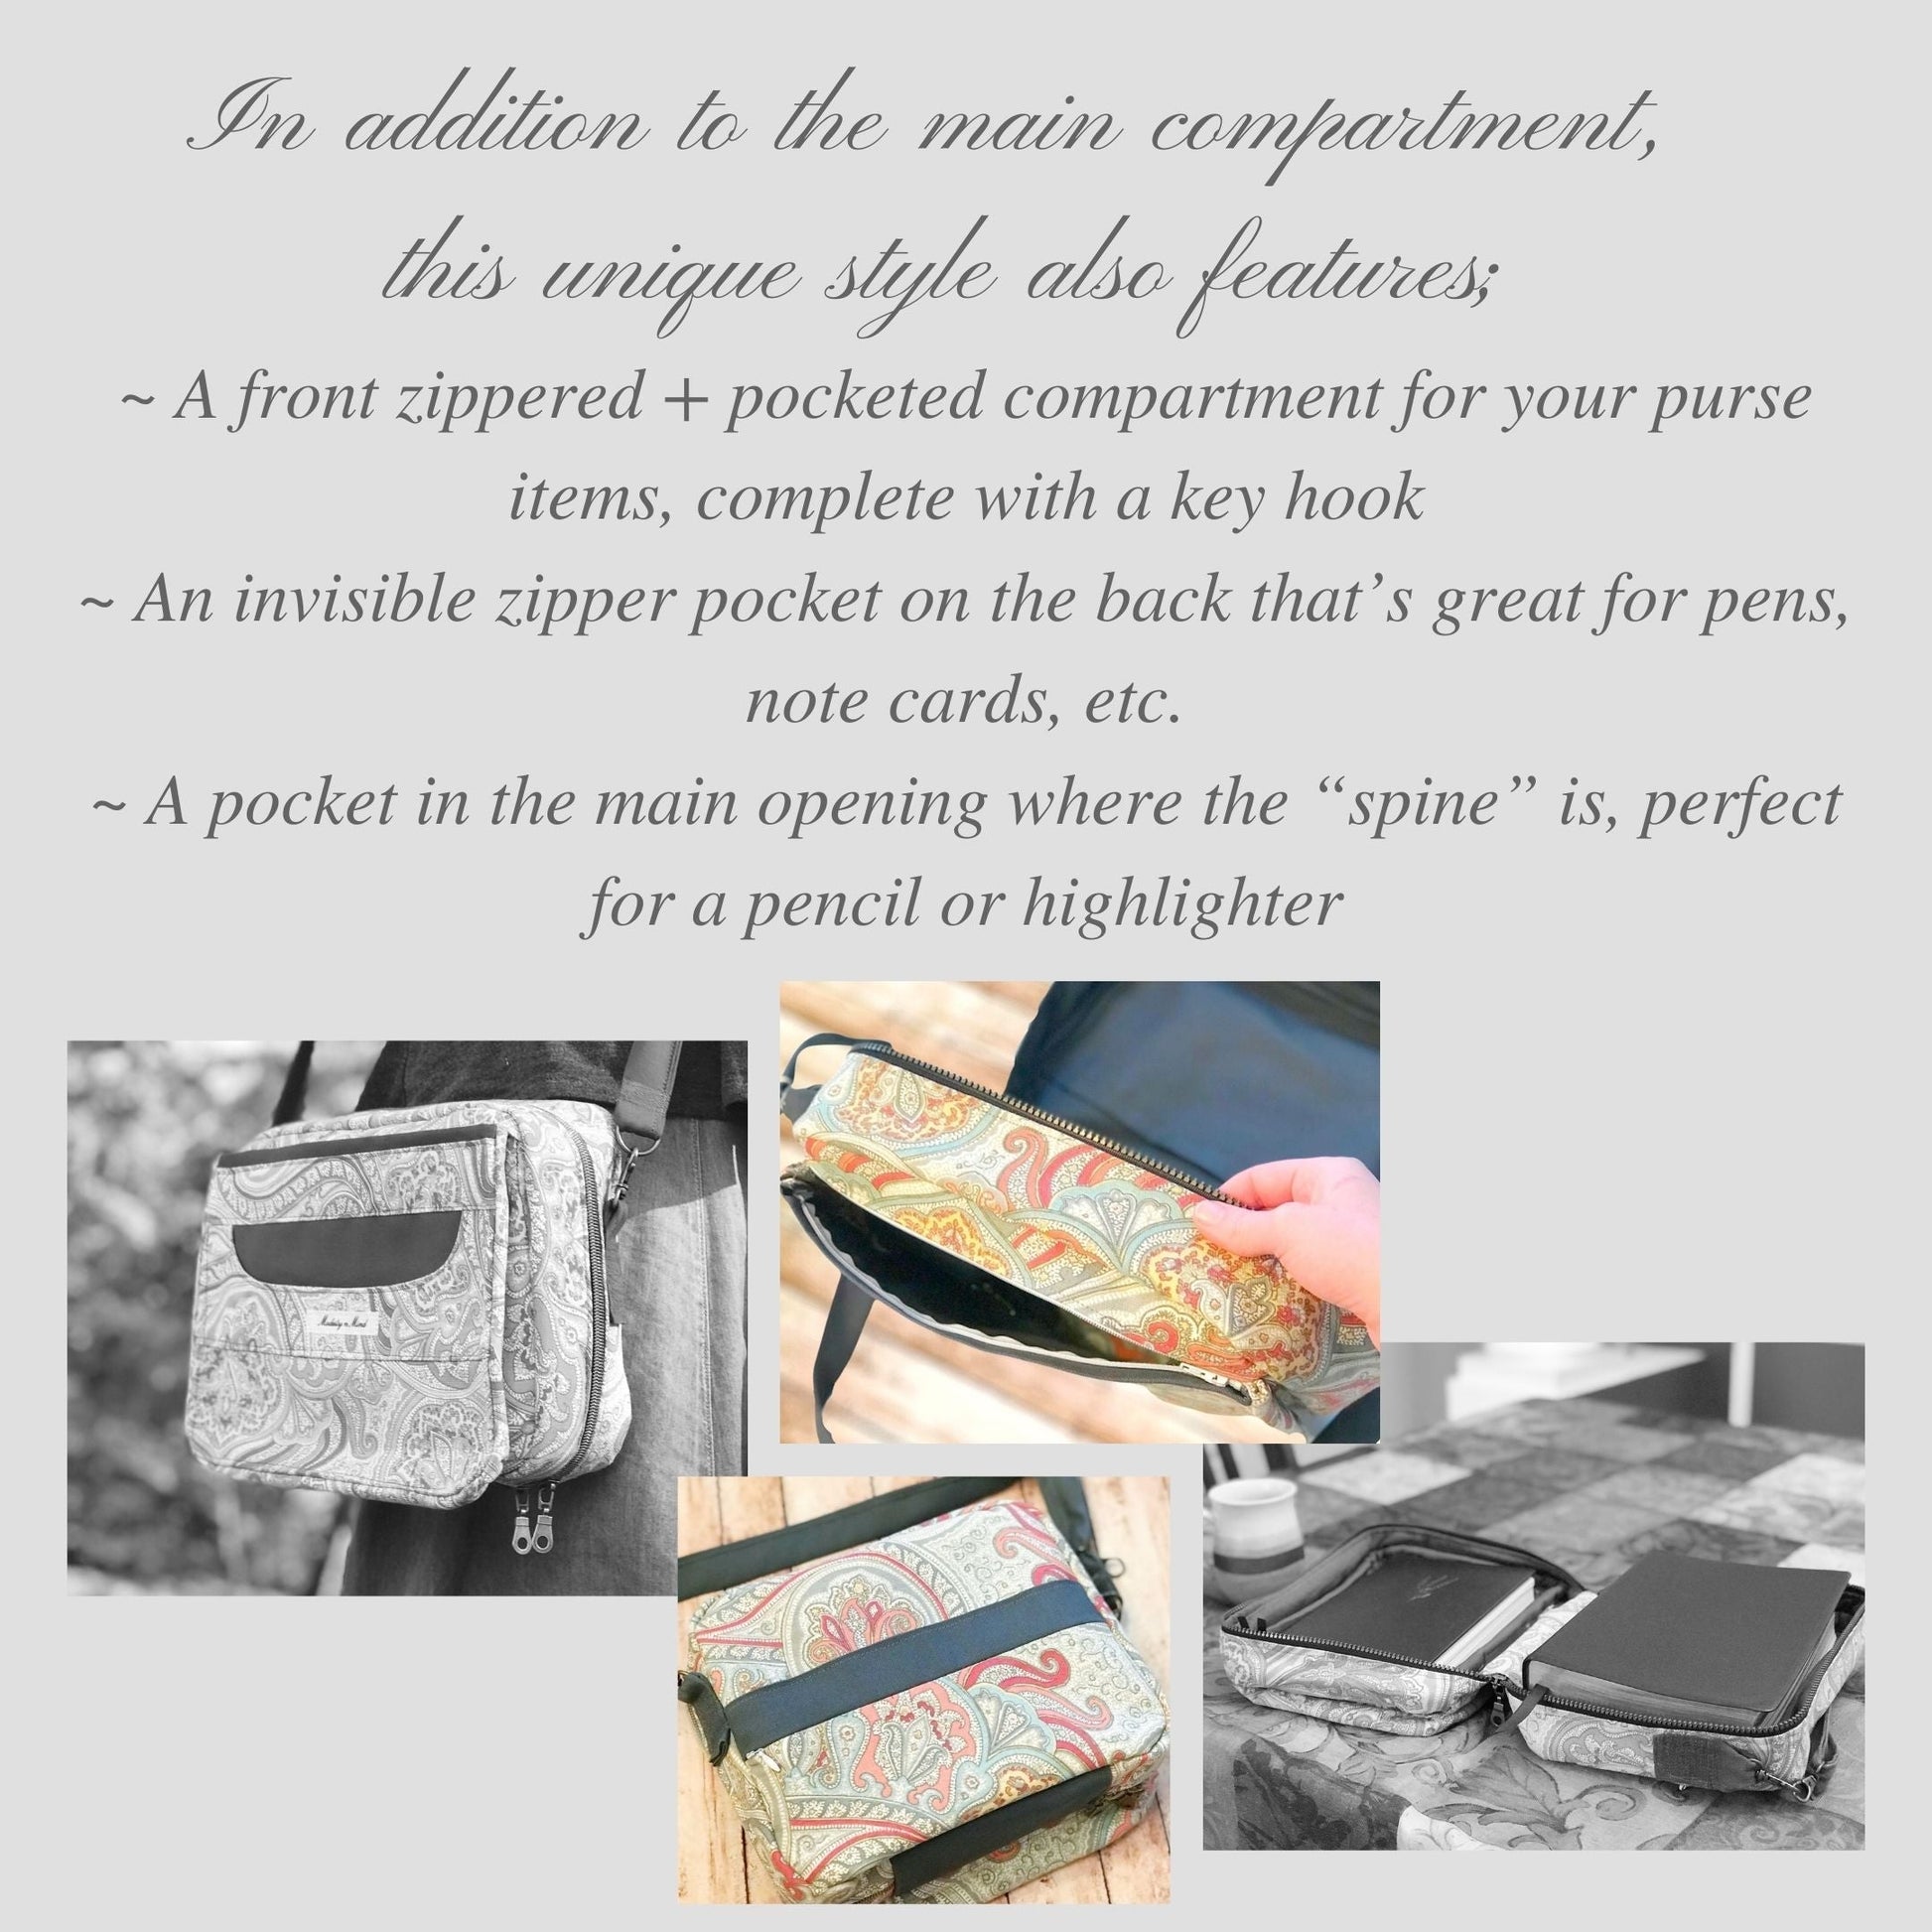 Bible Bag description graphic:In addition, this unique purse style also features: -A front zippered + pocketed compartment for purse items (complete with a key hook) -An invisible zipper pocket on the back that’s great for pens, note cards, hiding things, etc. -A pocket in the main opening where the “spine” is, ideal for pens/highlighters